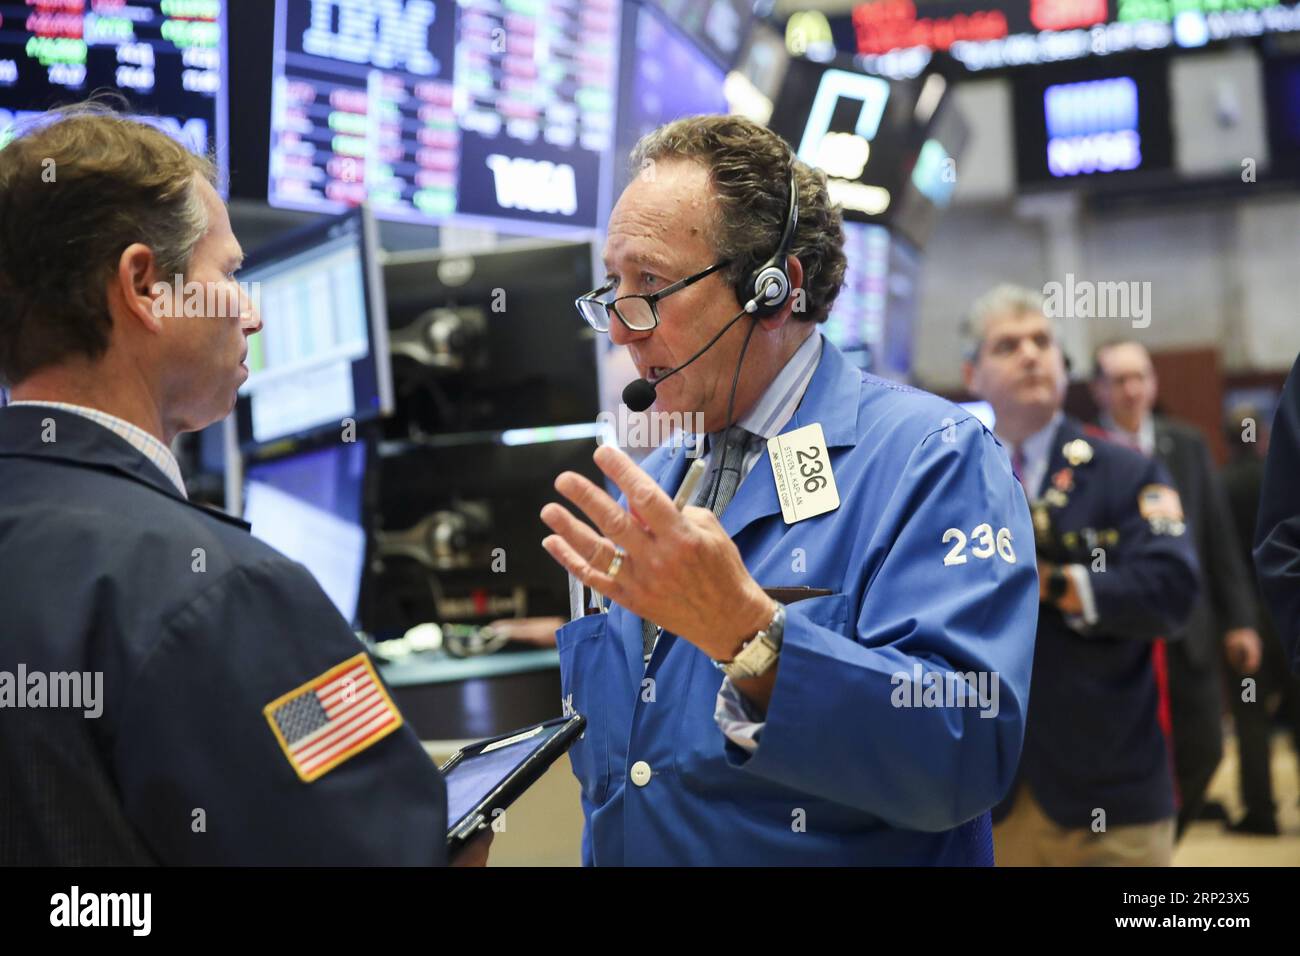 (180815) -- NEW YORK, Aug. 15, 2018 -- Traders work at the New York Stock Exchange in New York, the United States, on Aug. 15, 2018. U.S. stocks closed lower on Wednesday. The Dow Jones Industrial Average fell 137.51 points, or 0.54 percent, to 25,162.41. The S&P 500 was down 21.59 points, or 0.76 percent, to 2,818.37. The Nasdaq Composite Index dropped 96.78 points, or 1.23 percent, to 7,774.12. ) U.S.-NEW YORK-STOCKS WangxYing PUBLICATIONxNOTxINxCHN Stock Photo